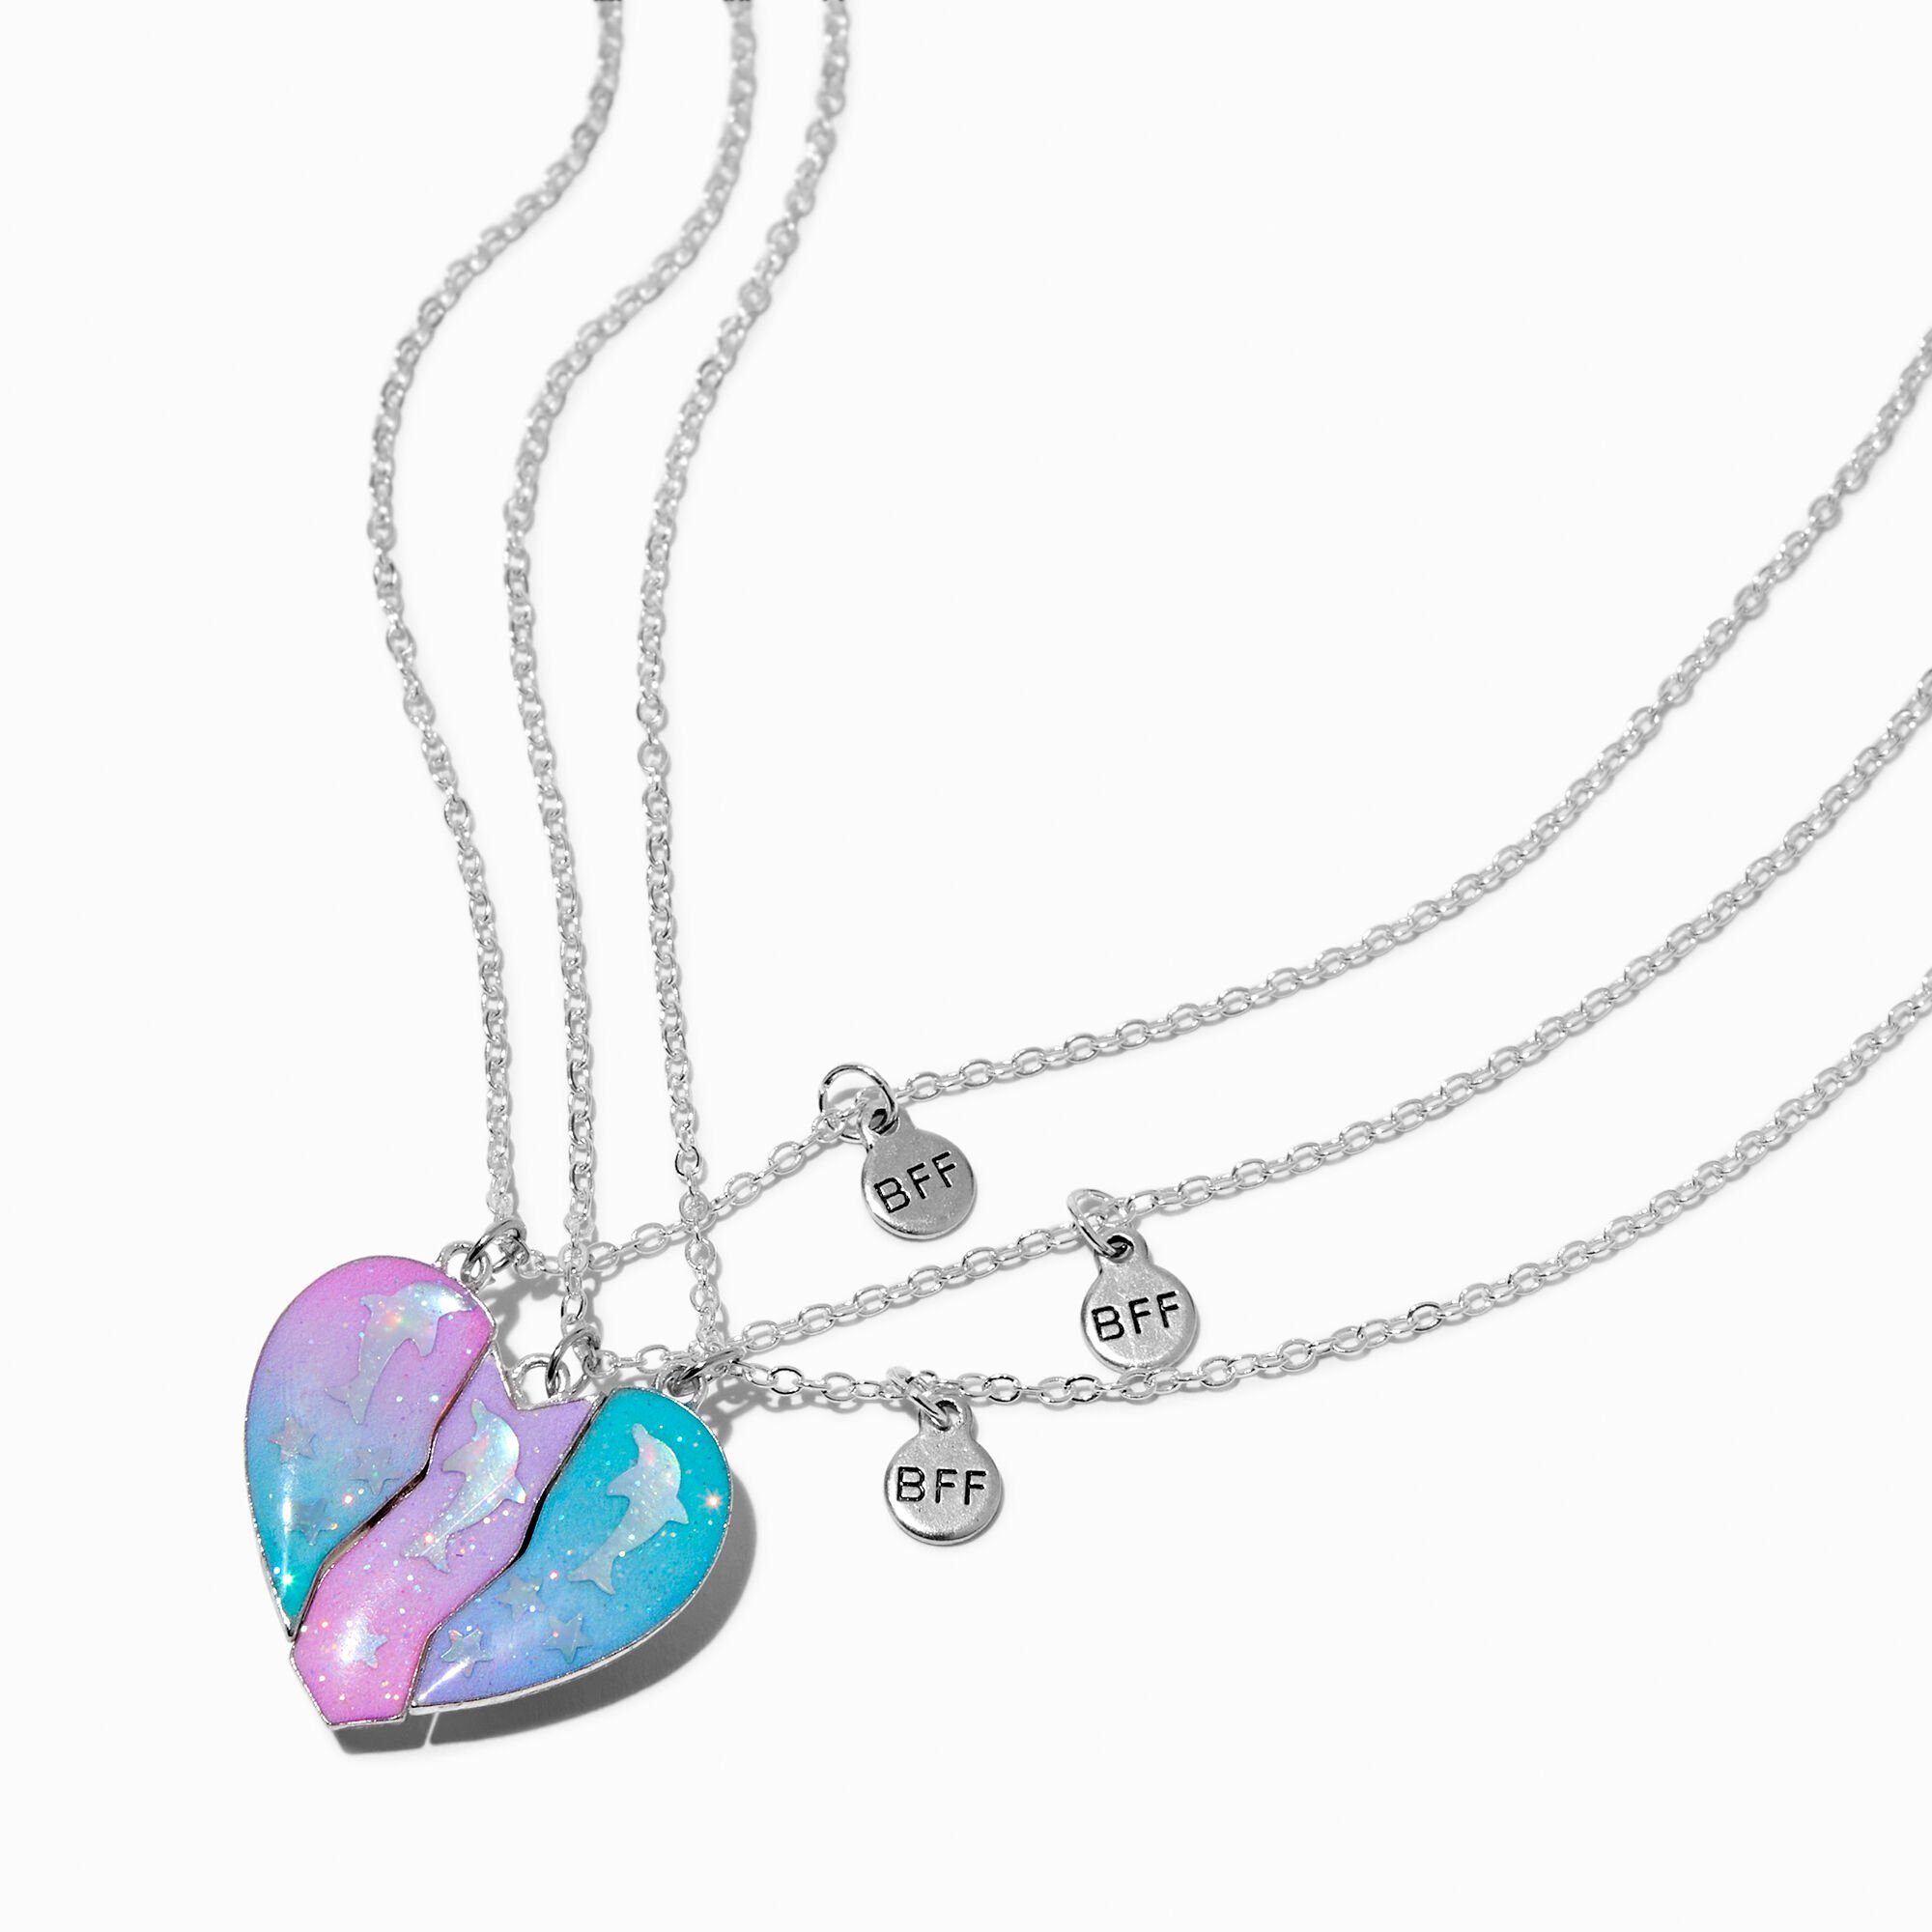 View Claires Best Friends Dolphin Ombre Heart Pendant Necklaces 3 Pack Silver information